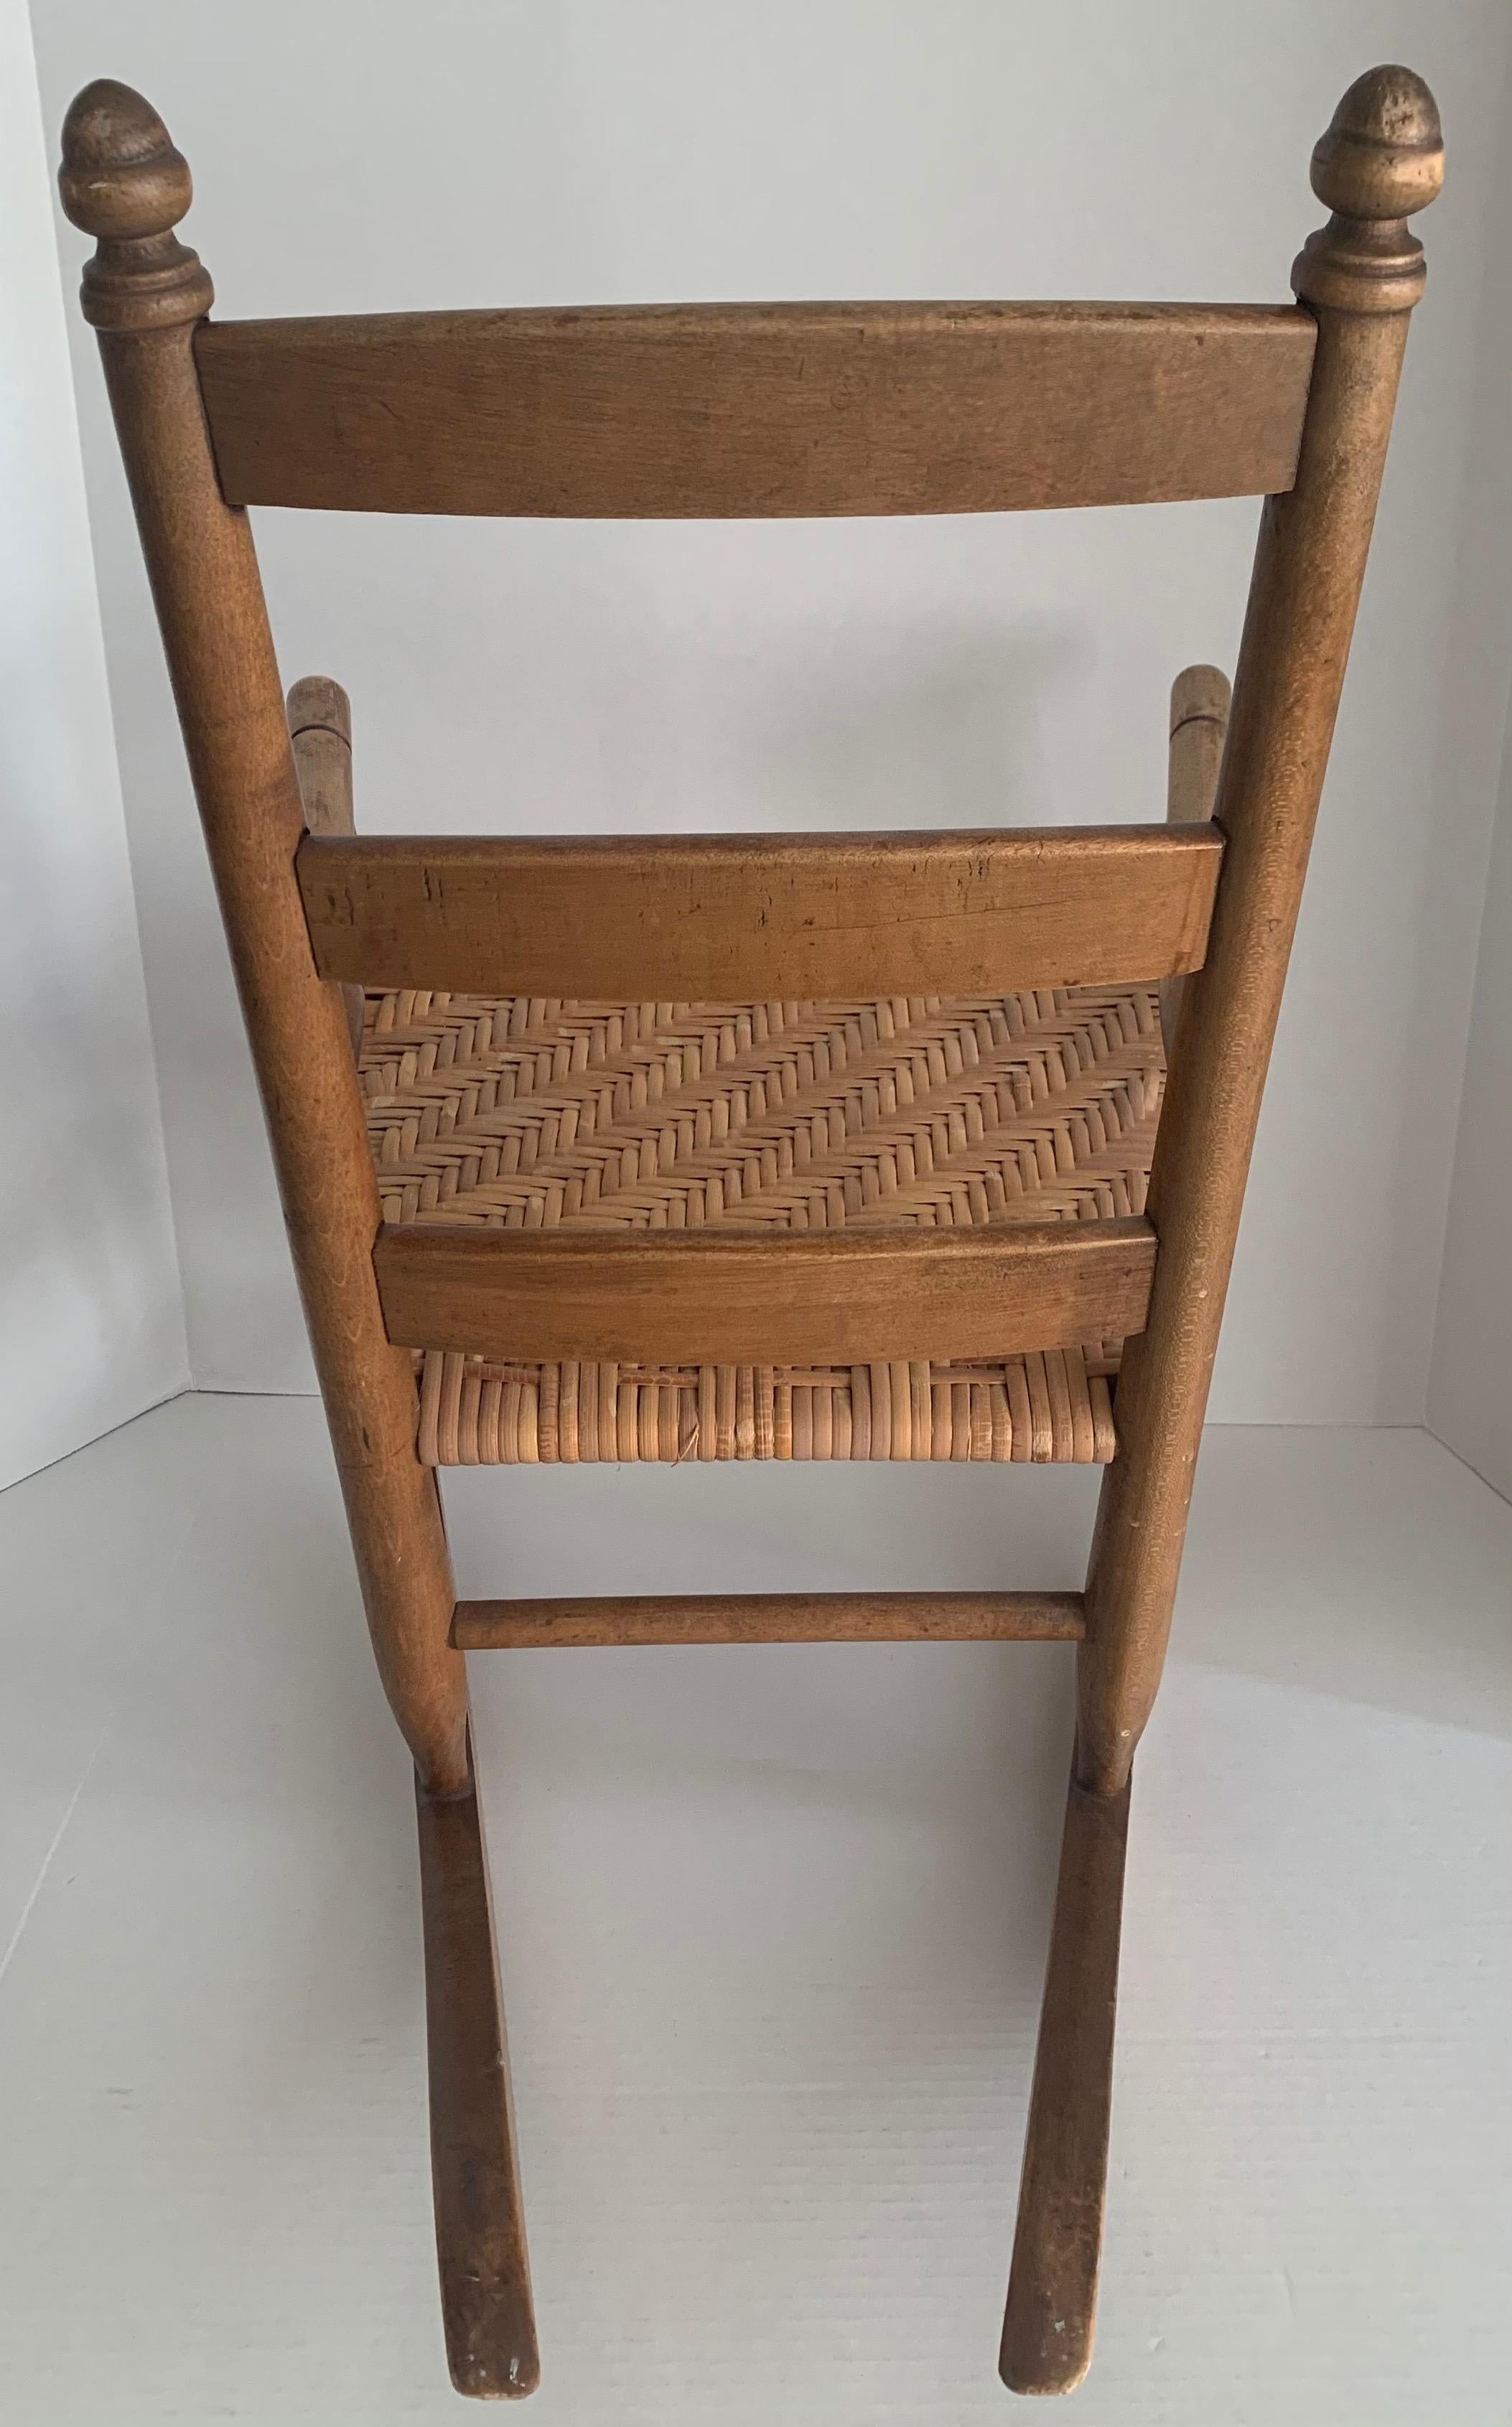 1950s Rustic Style Wooden Children’s Rocking Chair In Good Condition For Sale In Stamford, CT